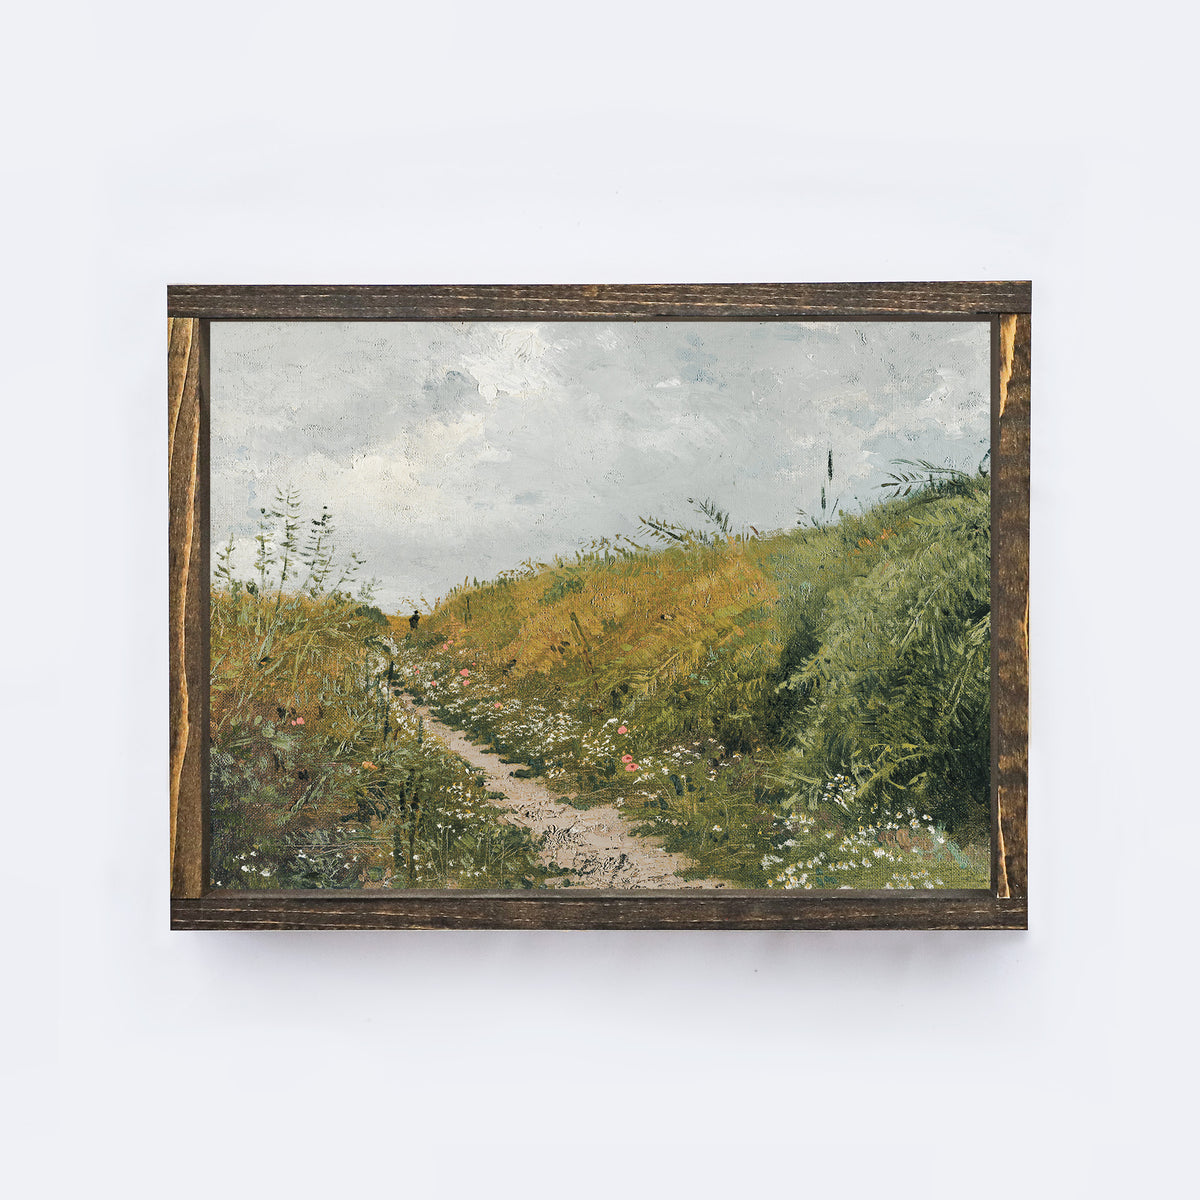 Man On A Path Landscape Painting A64